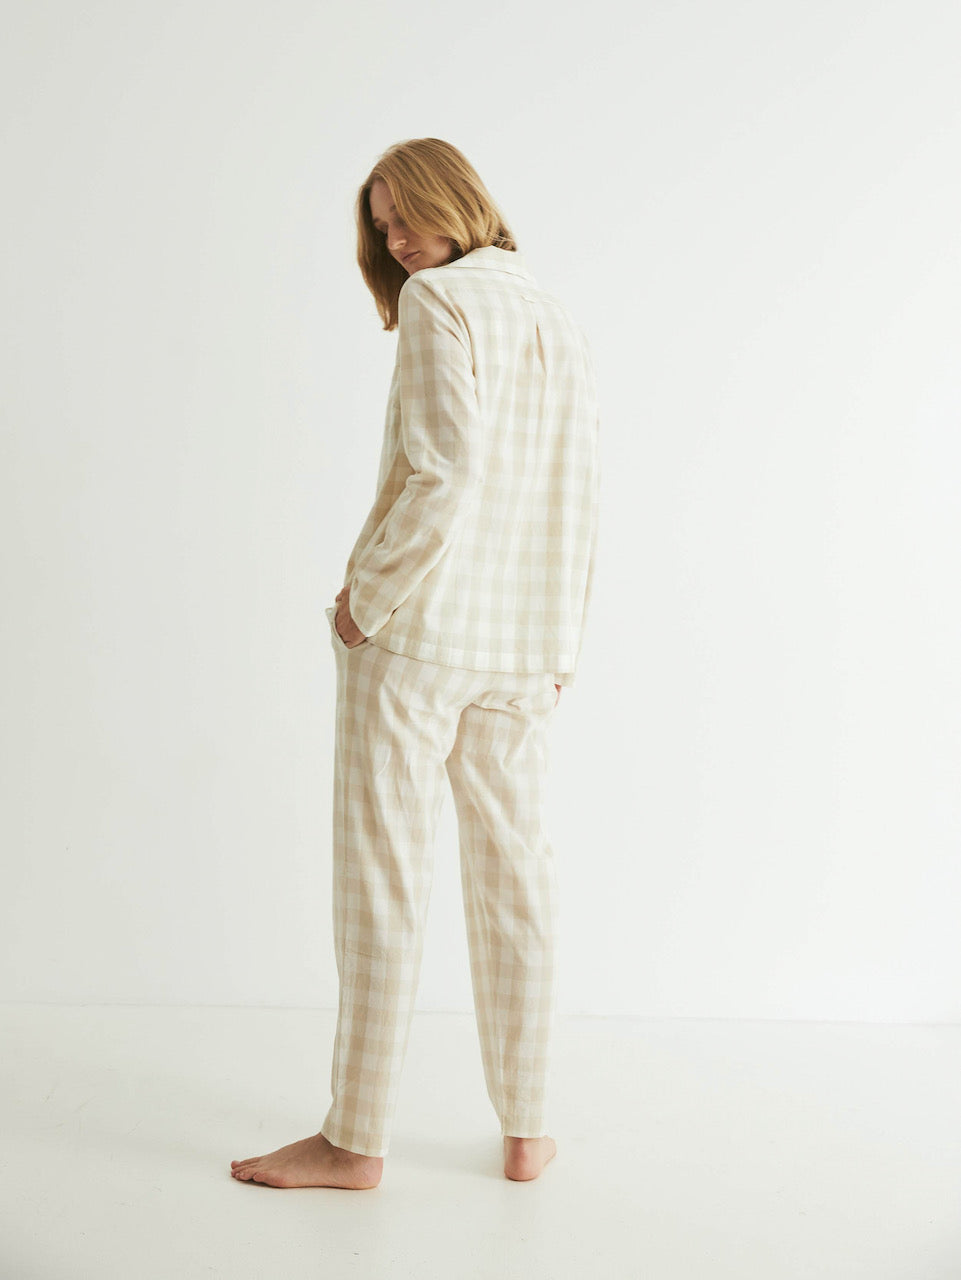 A woman wearing a &quot;Classic Set - Oatmeal Gingham&quot; pajama set by general sleep.